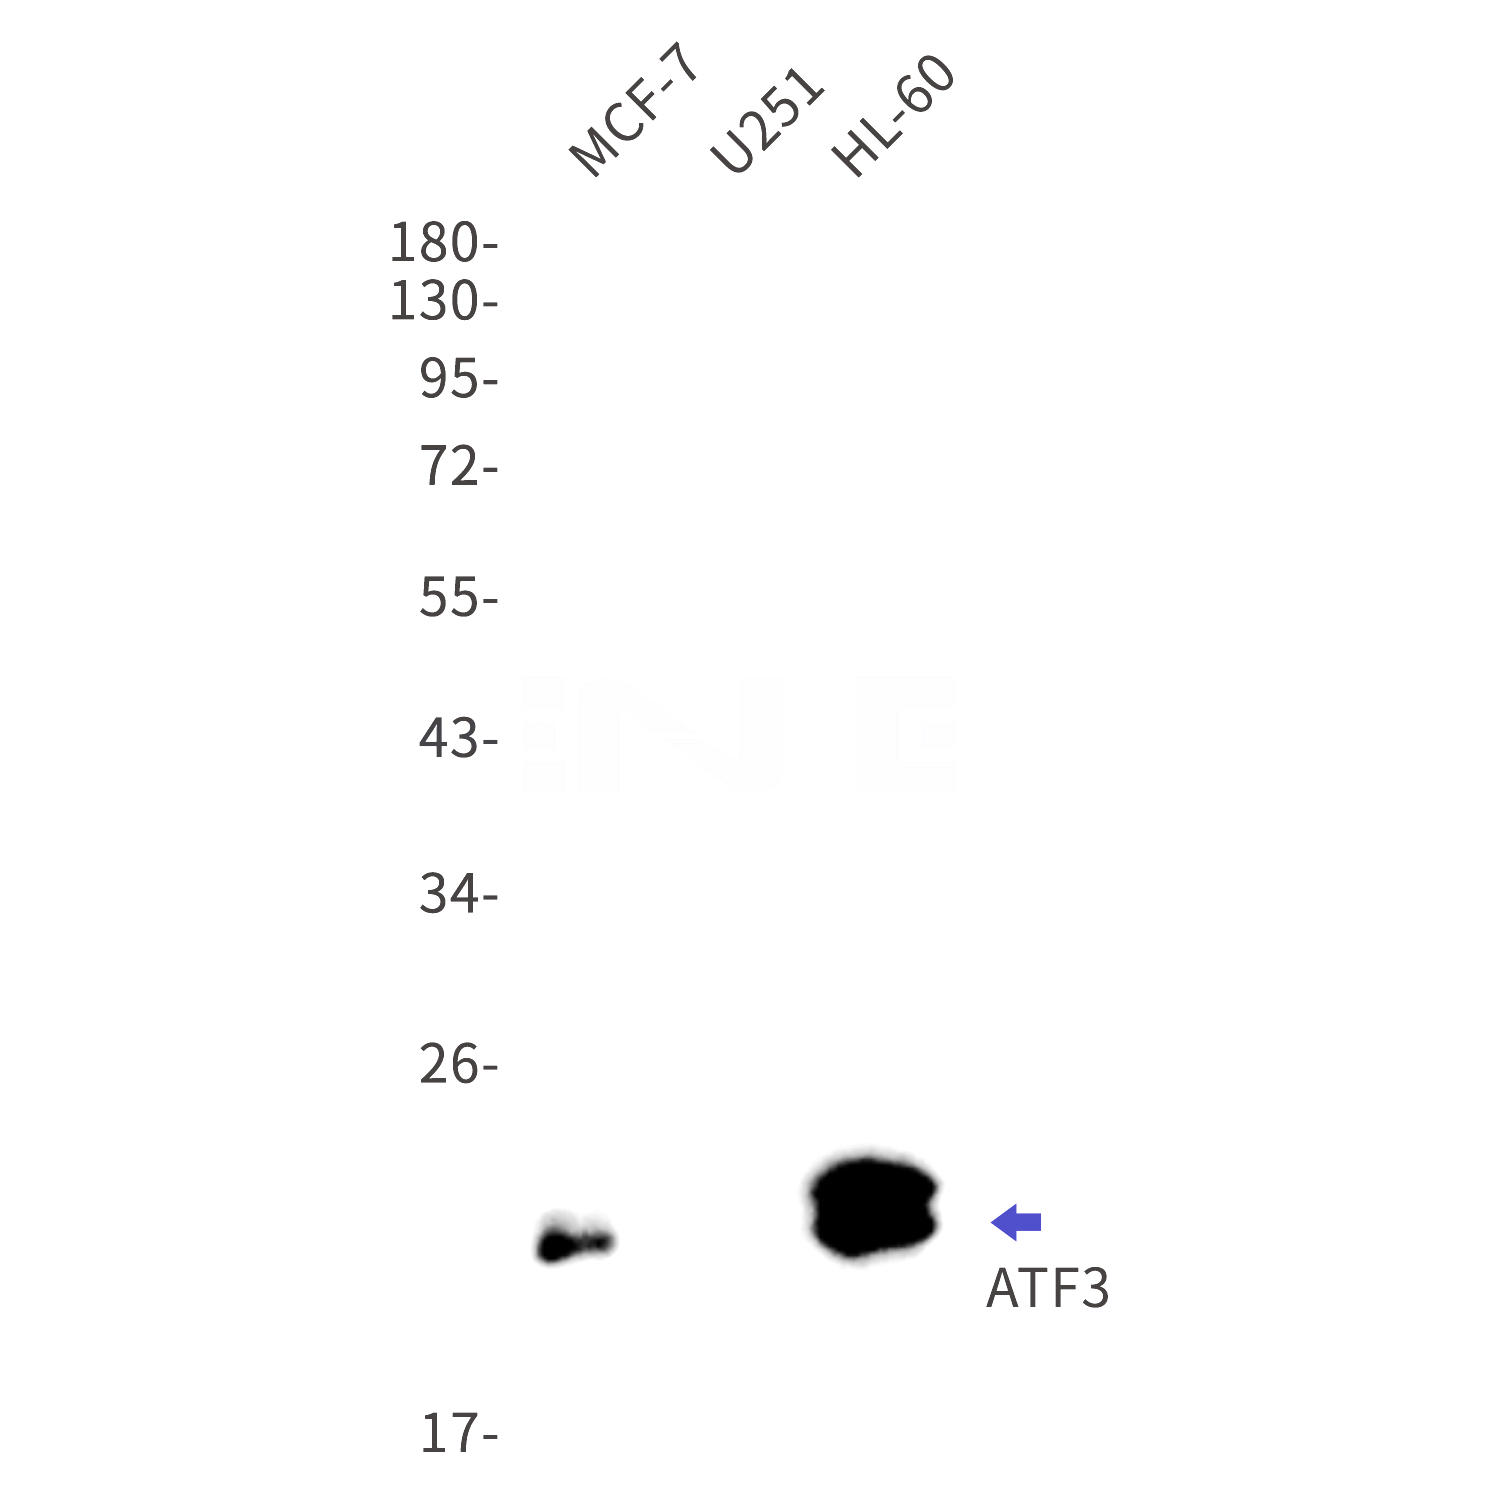 Western blot detection of ATF3 in MCF-7,U251,HL-60 cell lysates using ATF3 Rabbit mAb(1:1000 diluted).Predicted band size:21kDa.Observed band size:21kDa.